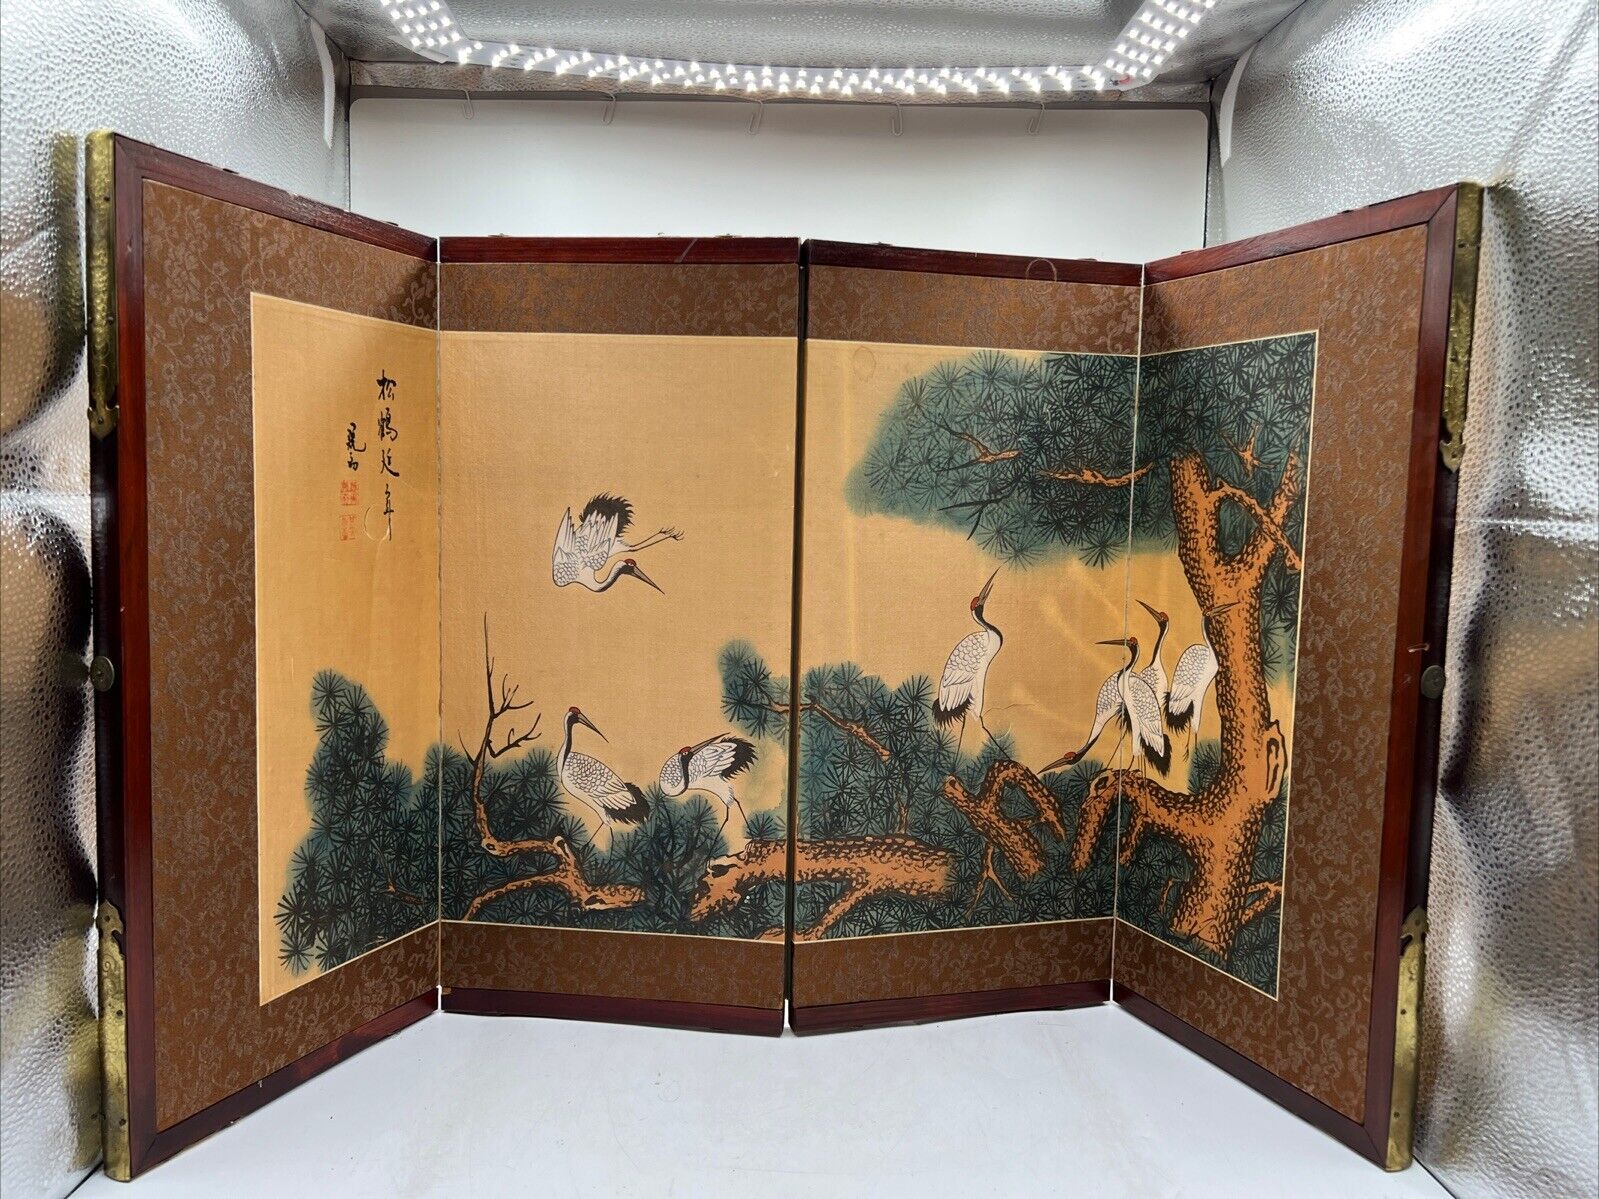 Vintage Chinese Asian Art 4 Panel Screen Hand Painted Silk 32”x 17” with Cranes